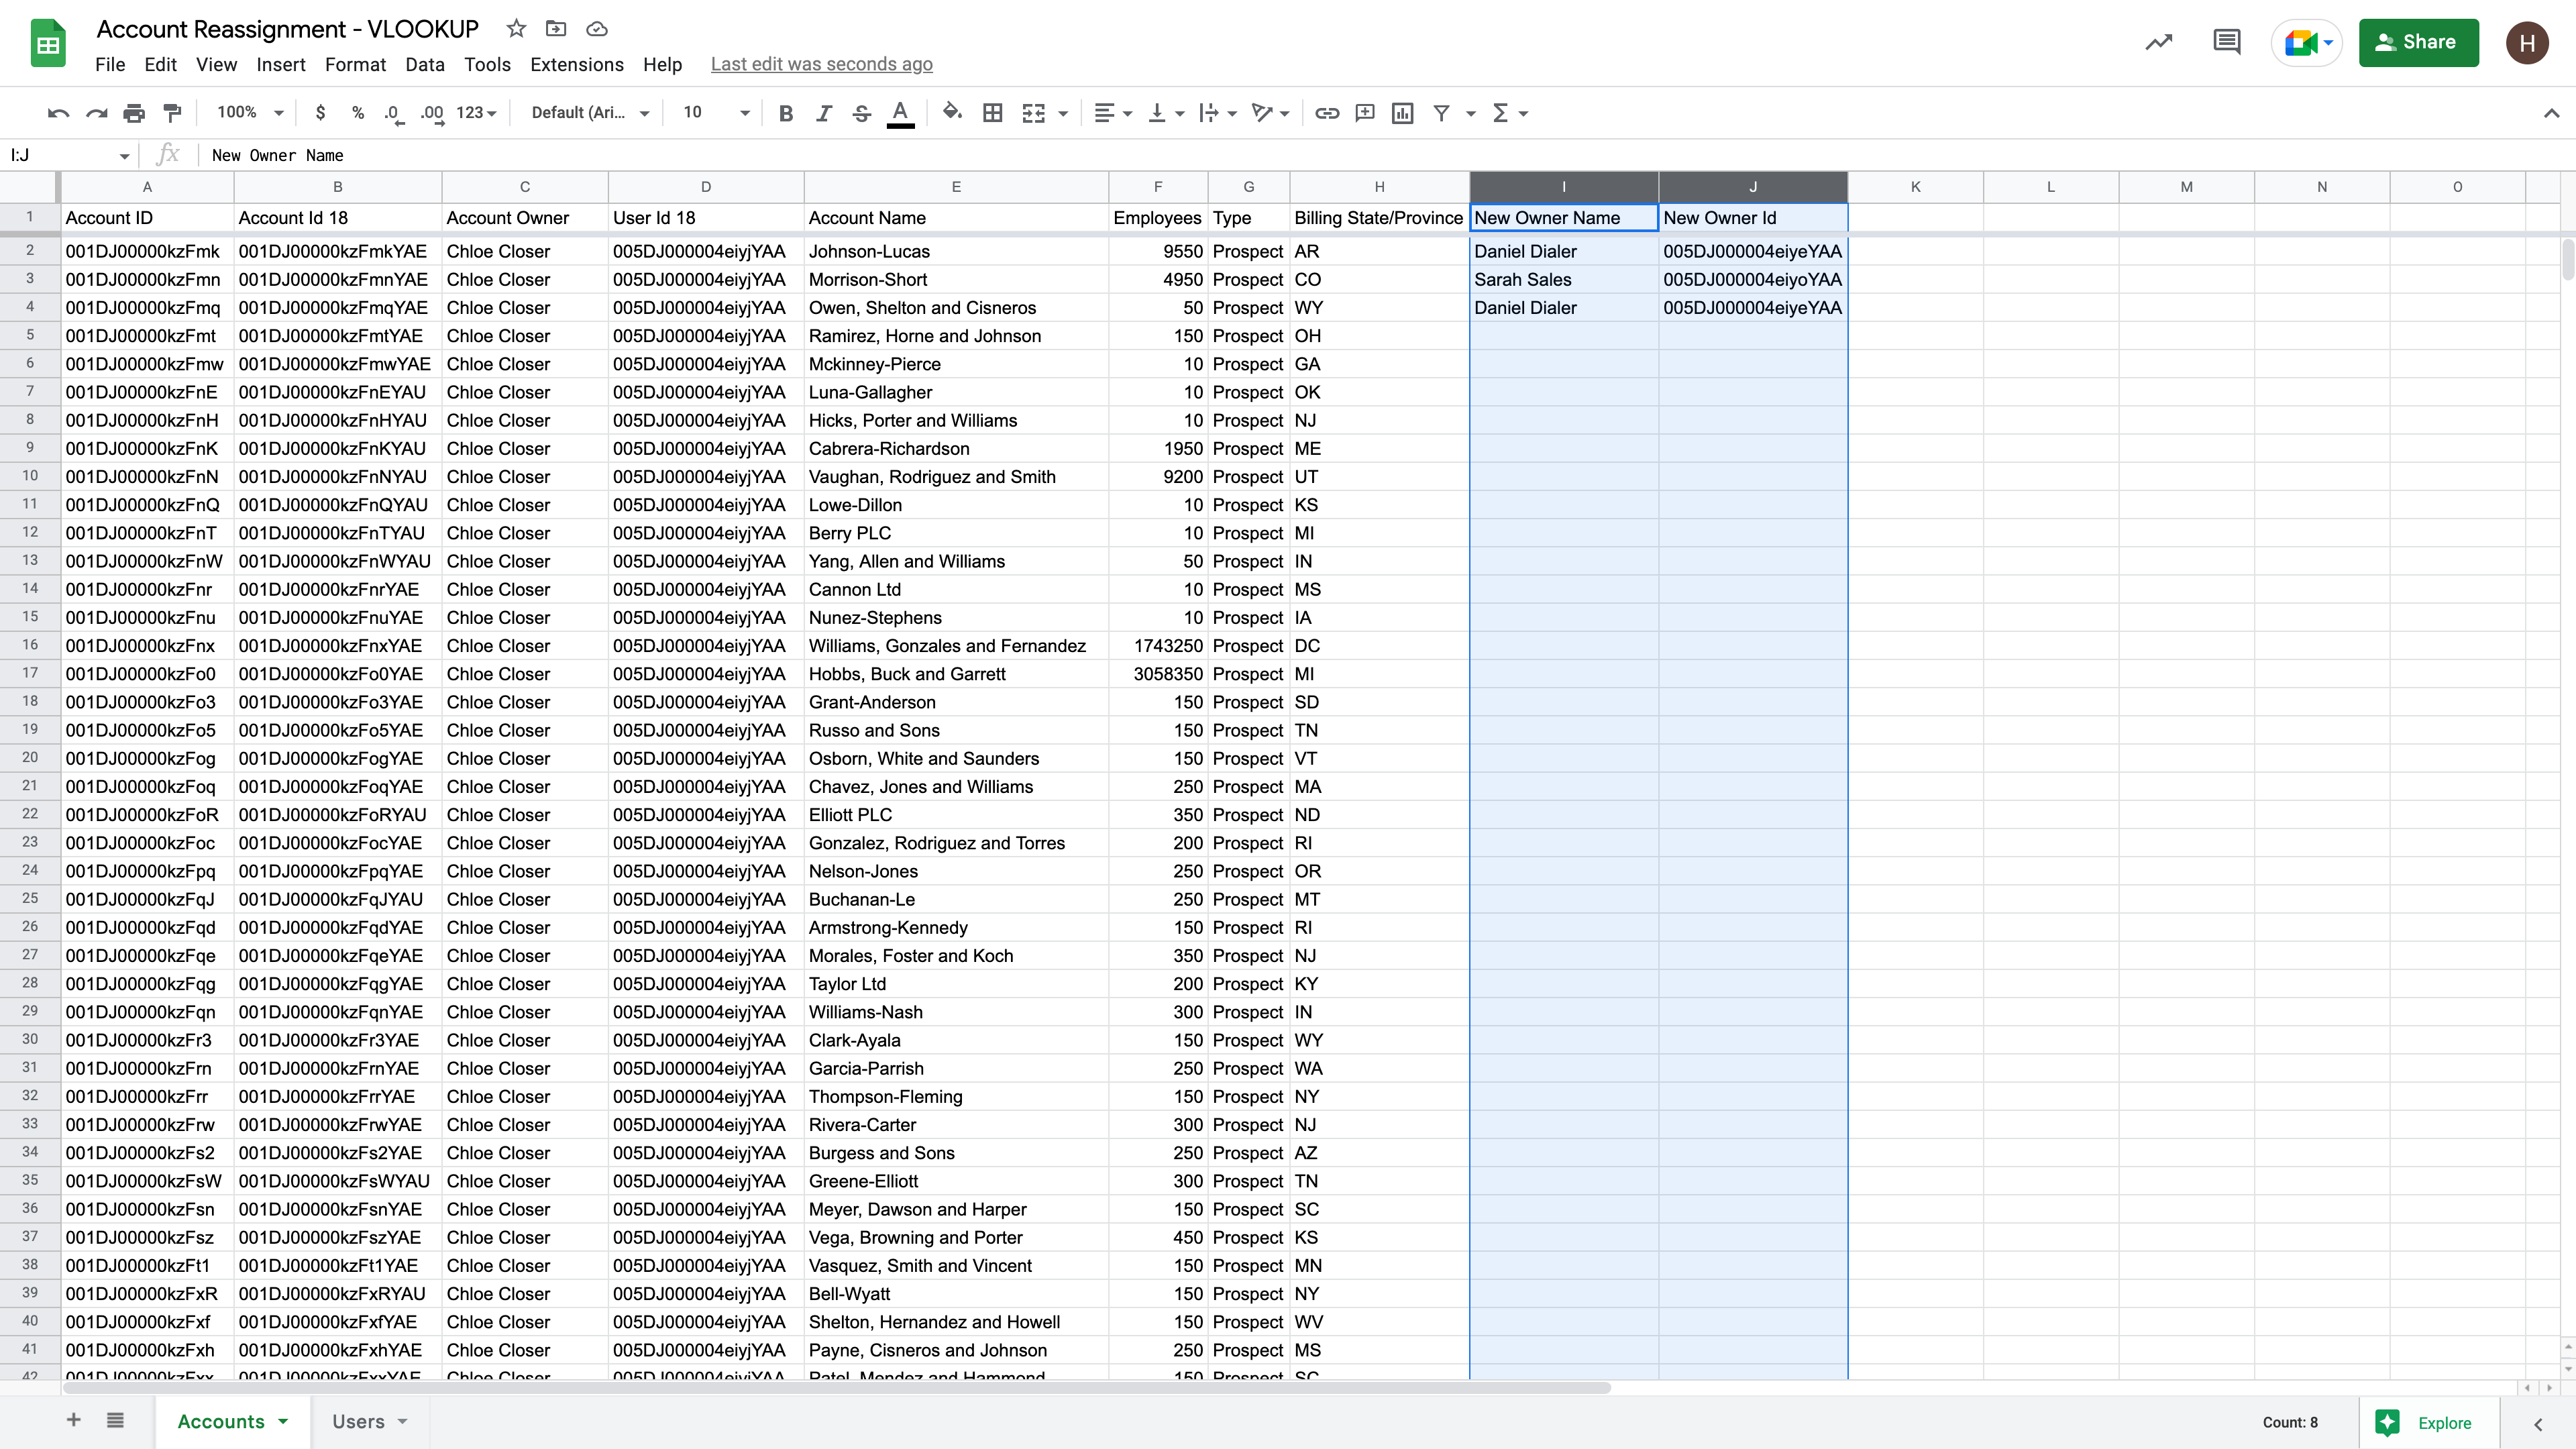 Specify new account owner using VLOOKUP in Google Sheets